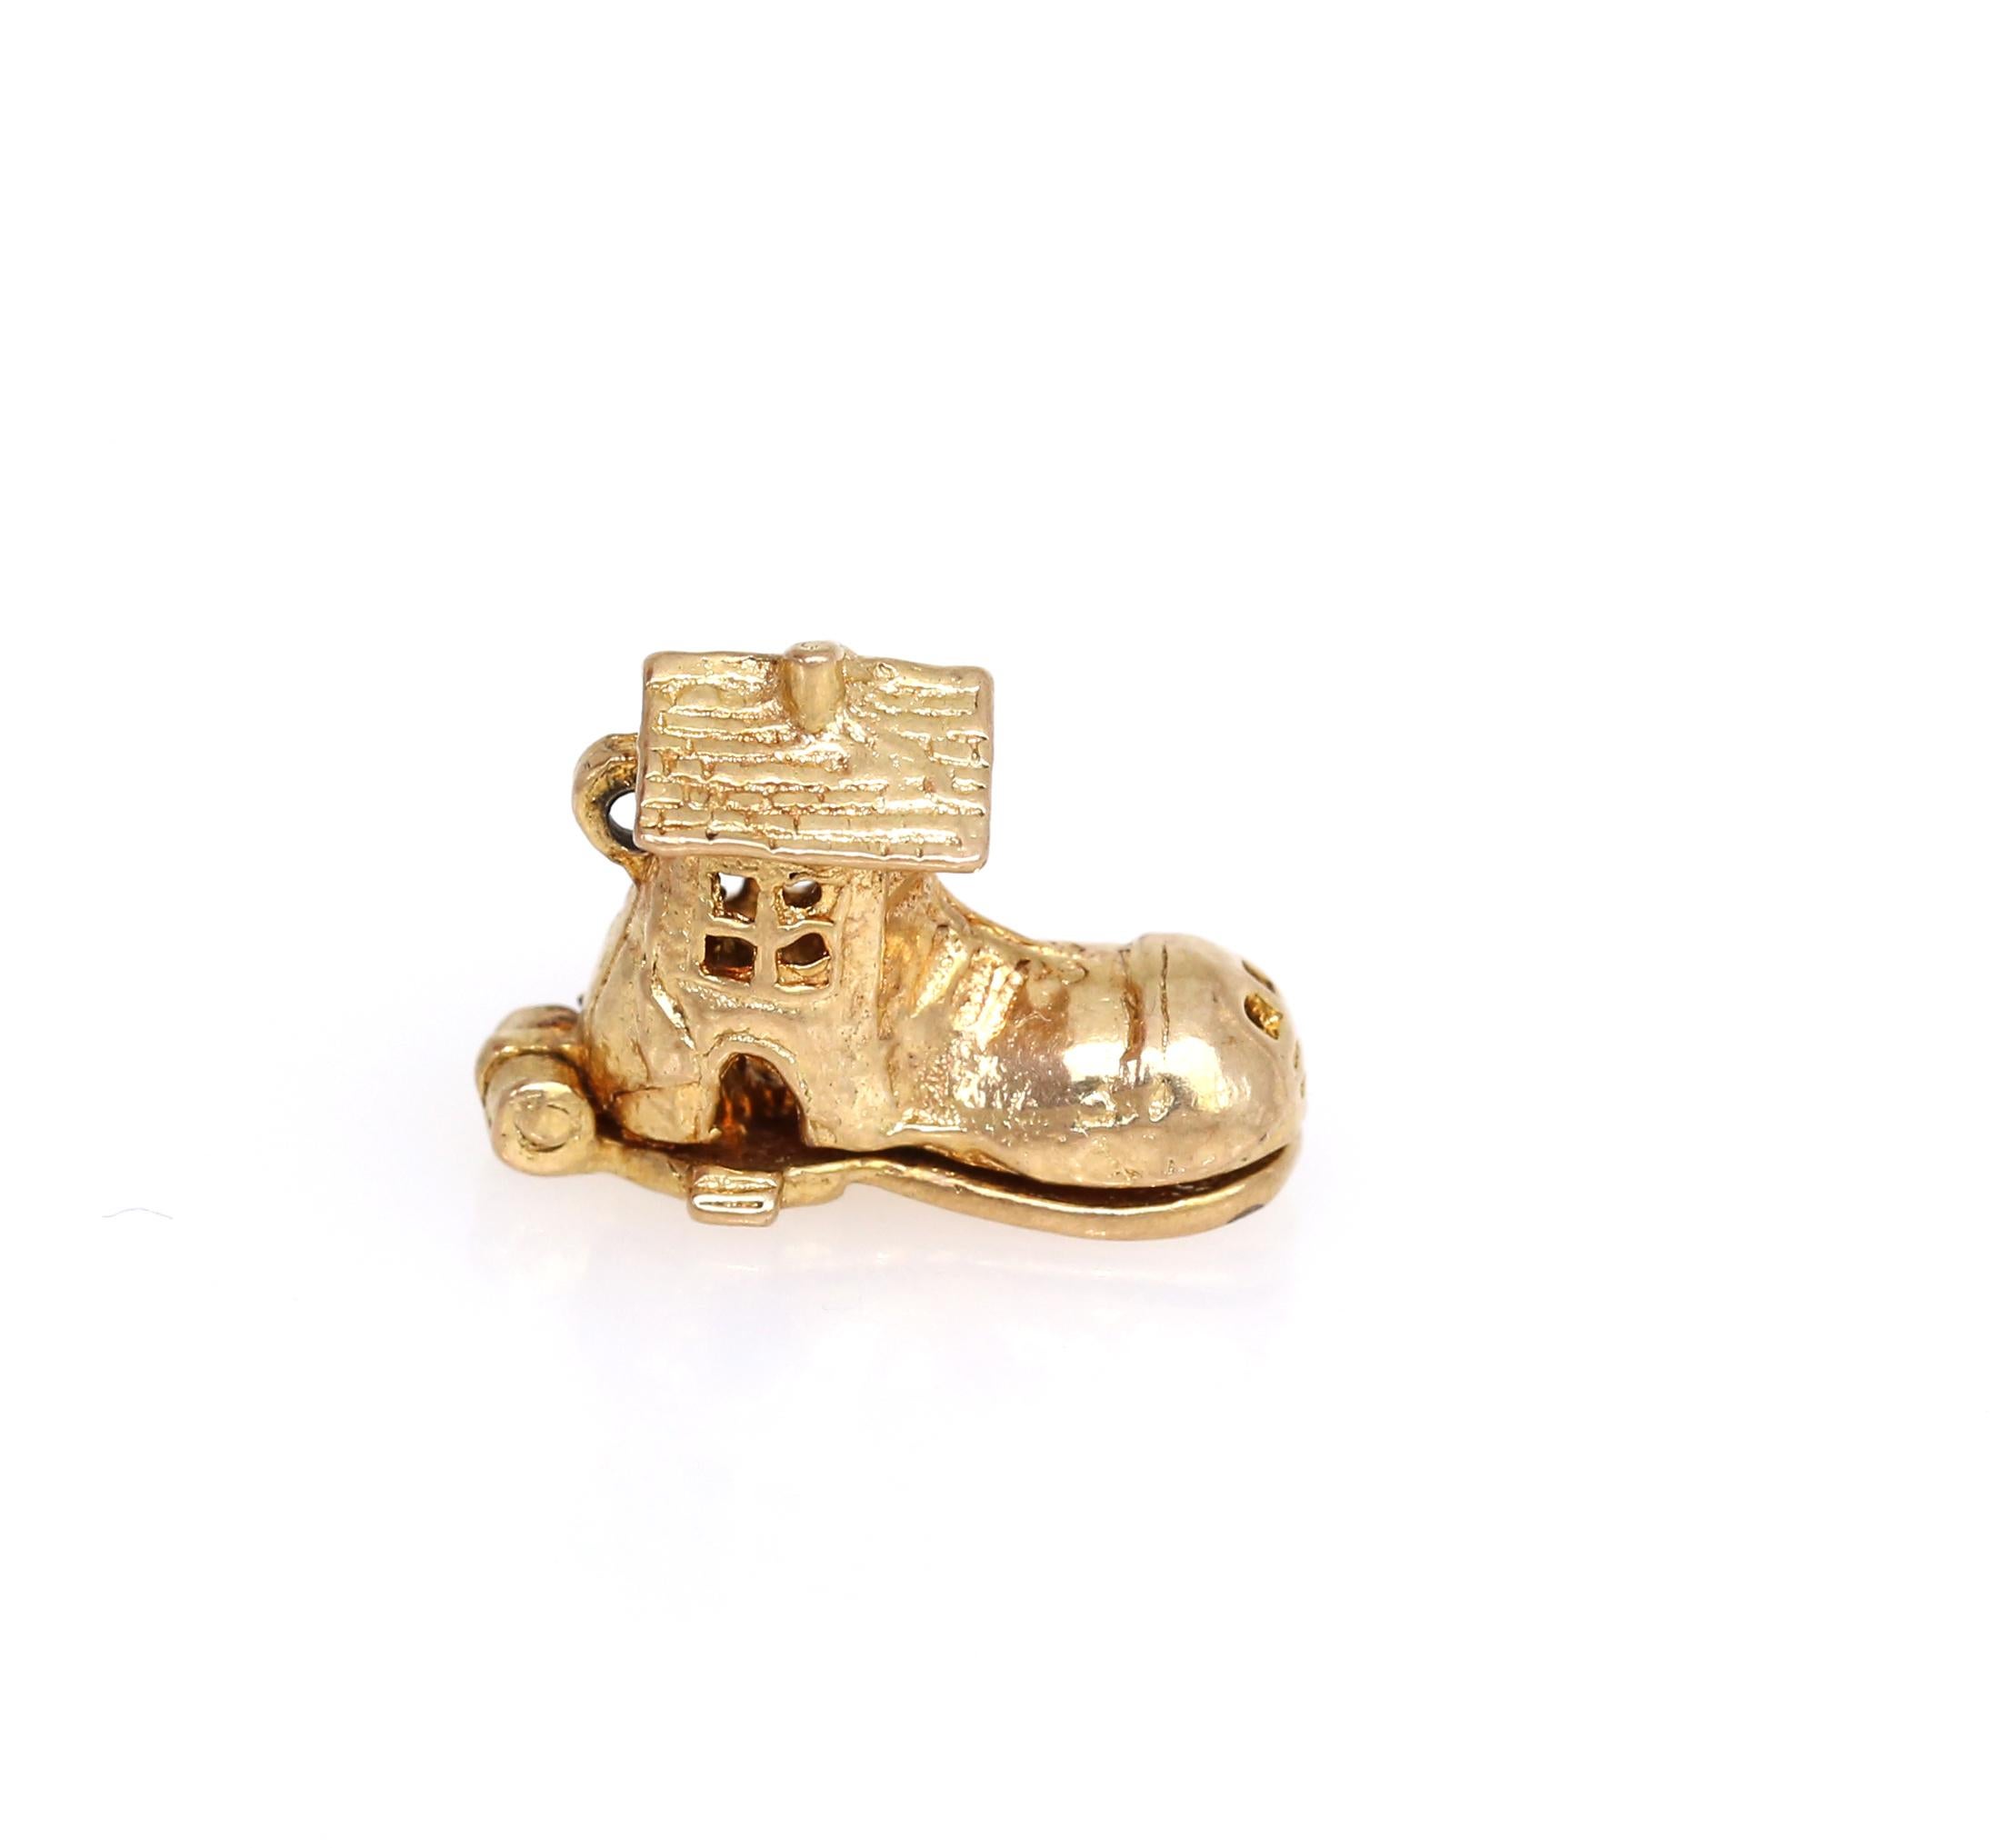 Victorian 9K Gold Charms for Bracelet British Shoe Cuckoo-clock
Charm bracelets have existed for a long time. Victorian 9K Gold items from England are most interesting, they are in its own league. First of all the details are great. The shoe opens